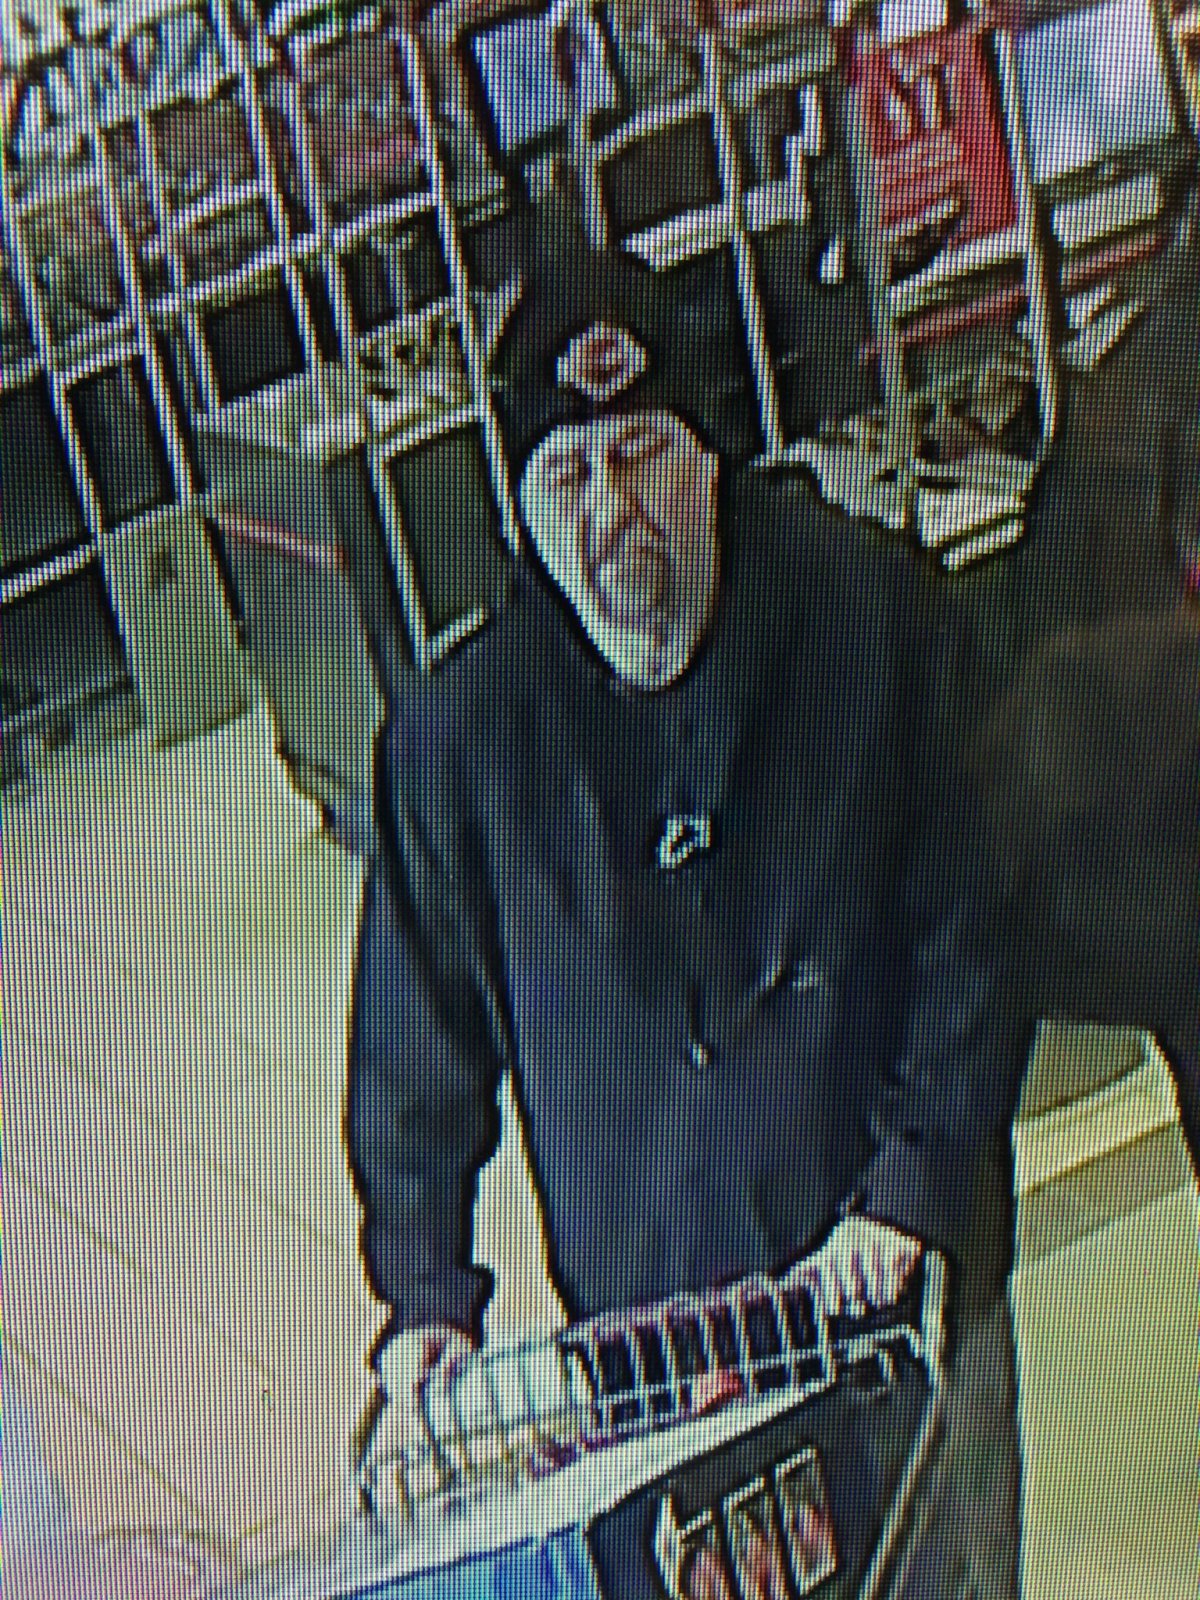 Police in Lindsay, Ont., are searching for a man who stole chainsaws from a Canadian Tire.